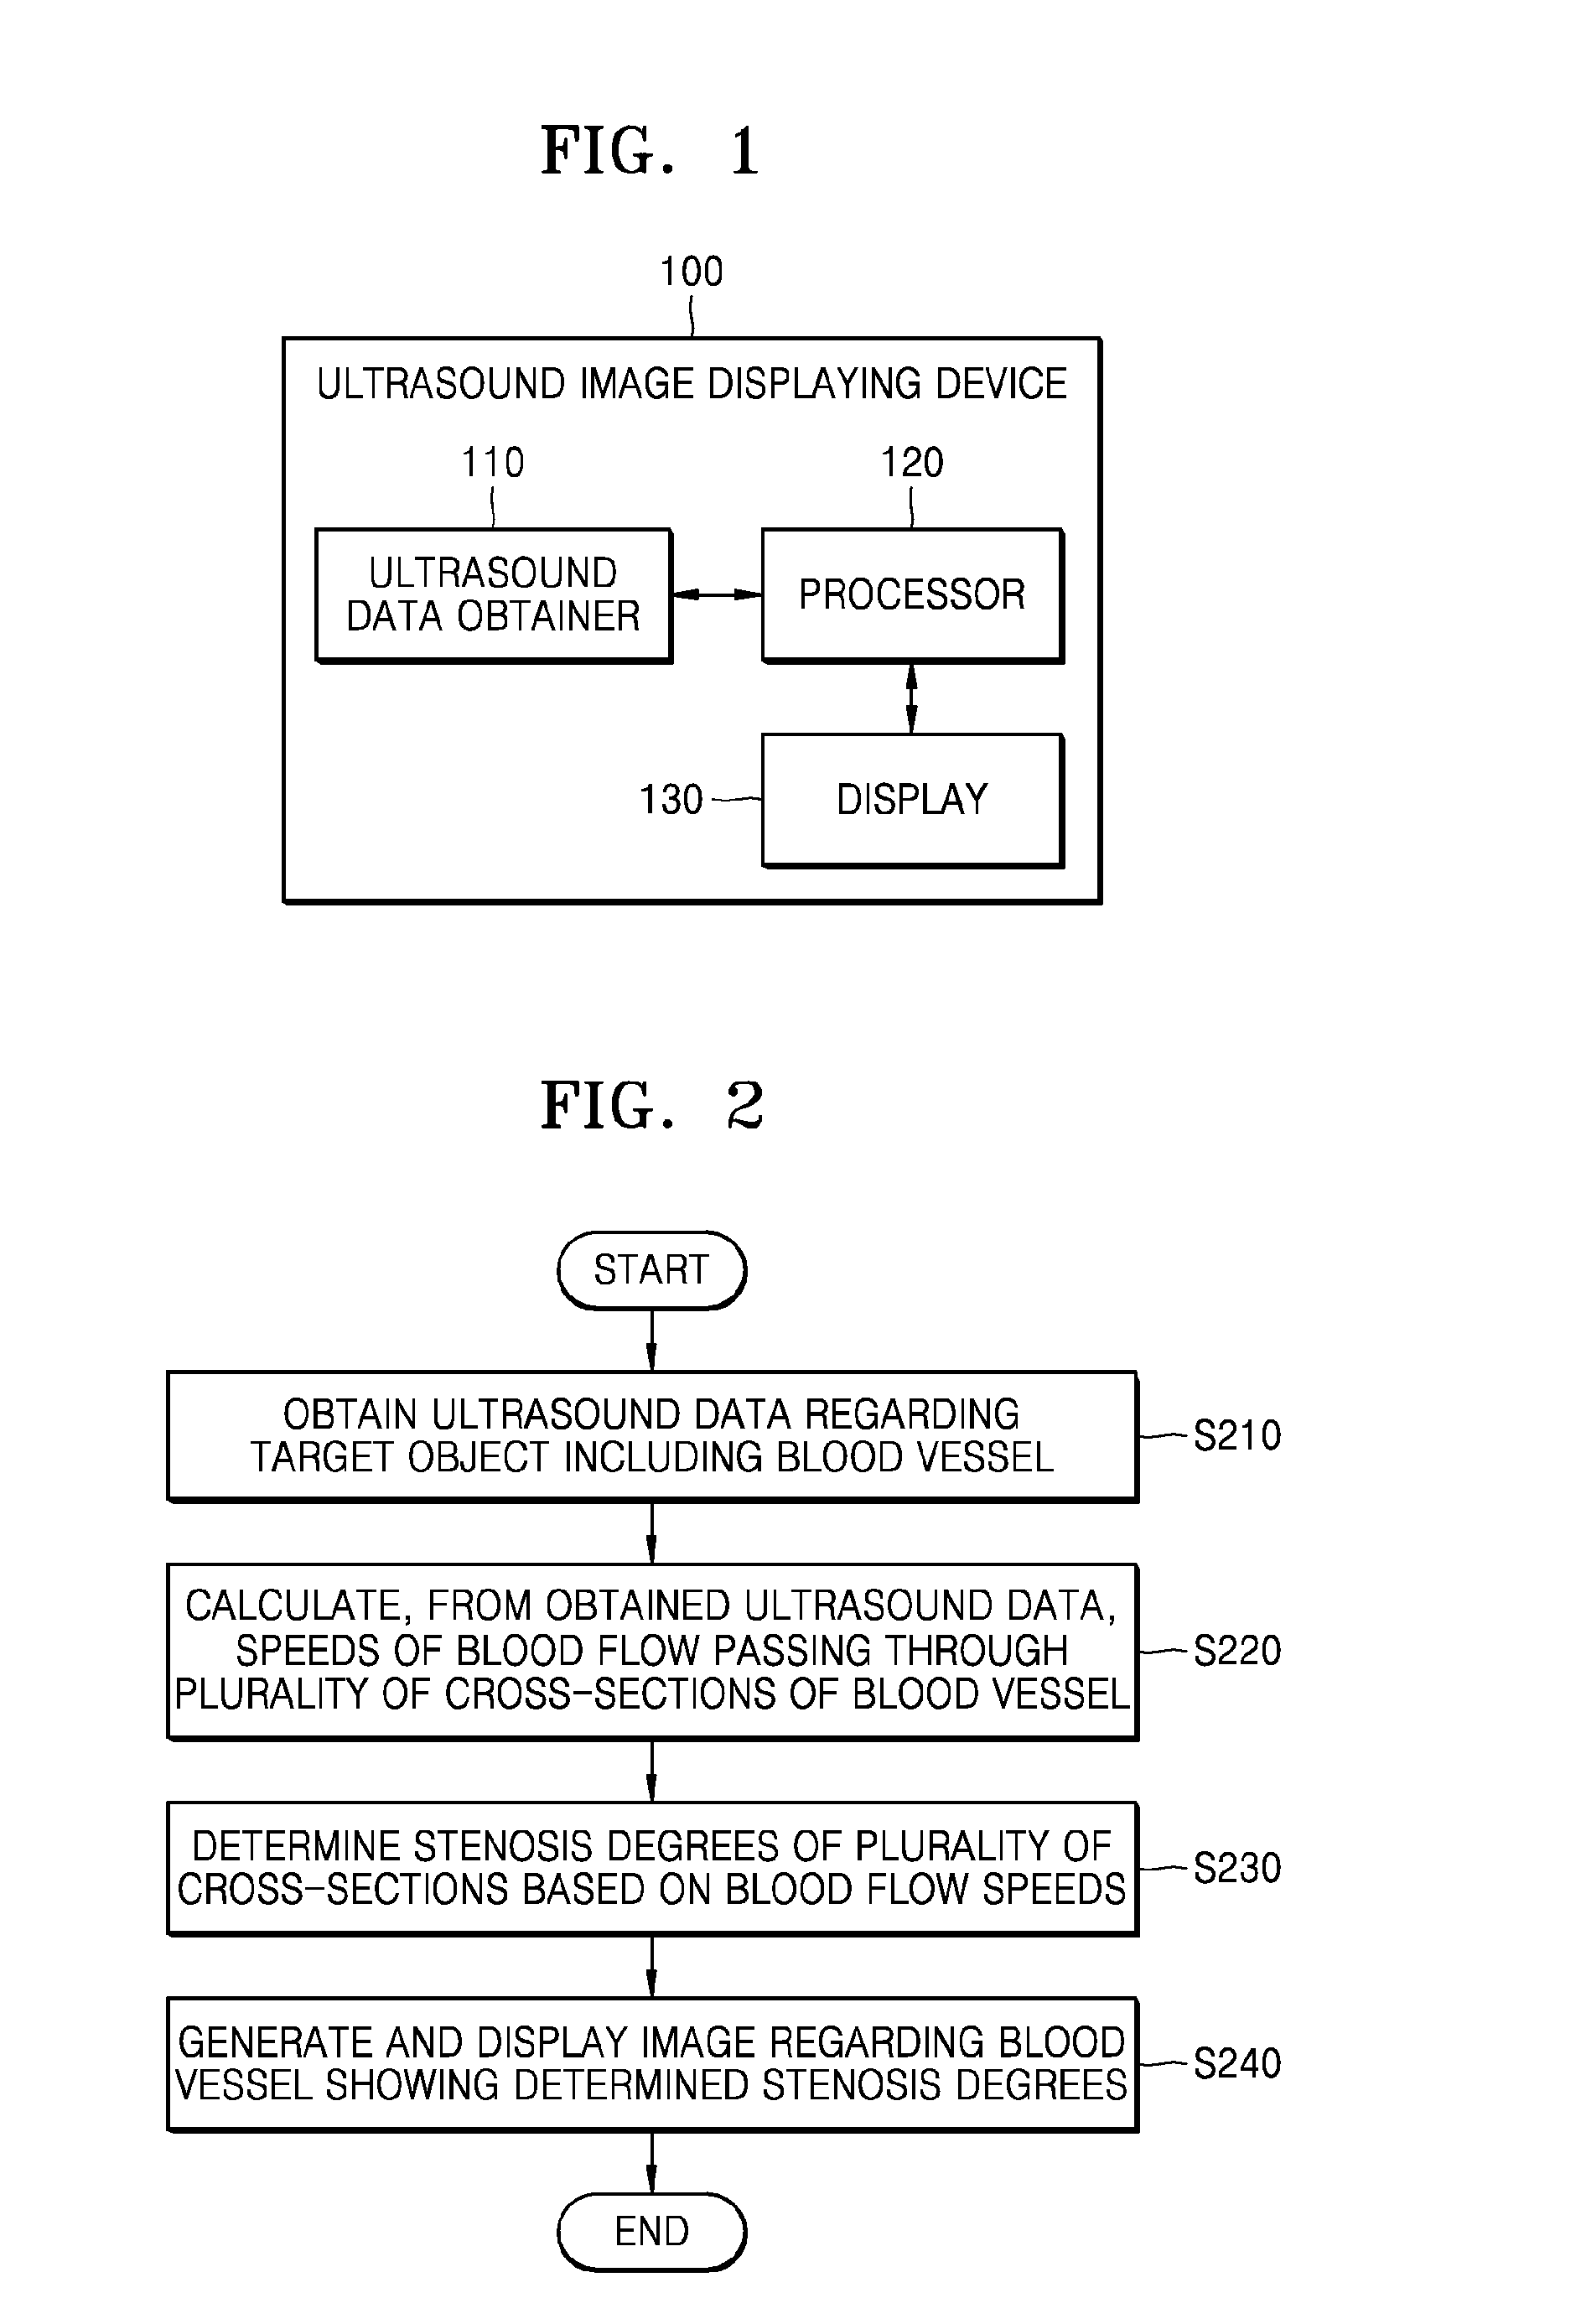 Apparatus and method for displaying ultrasound image